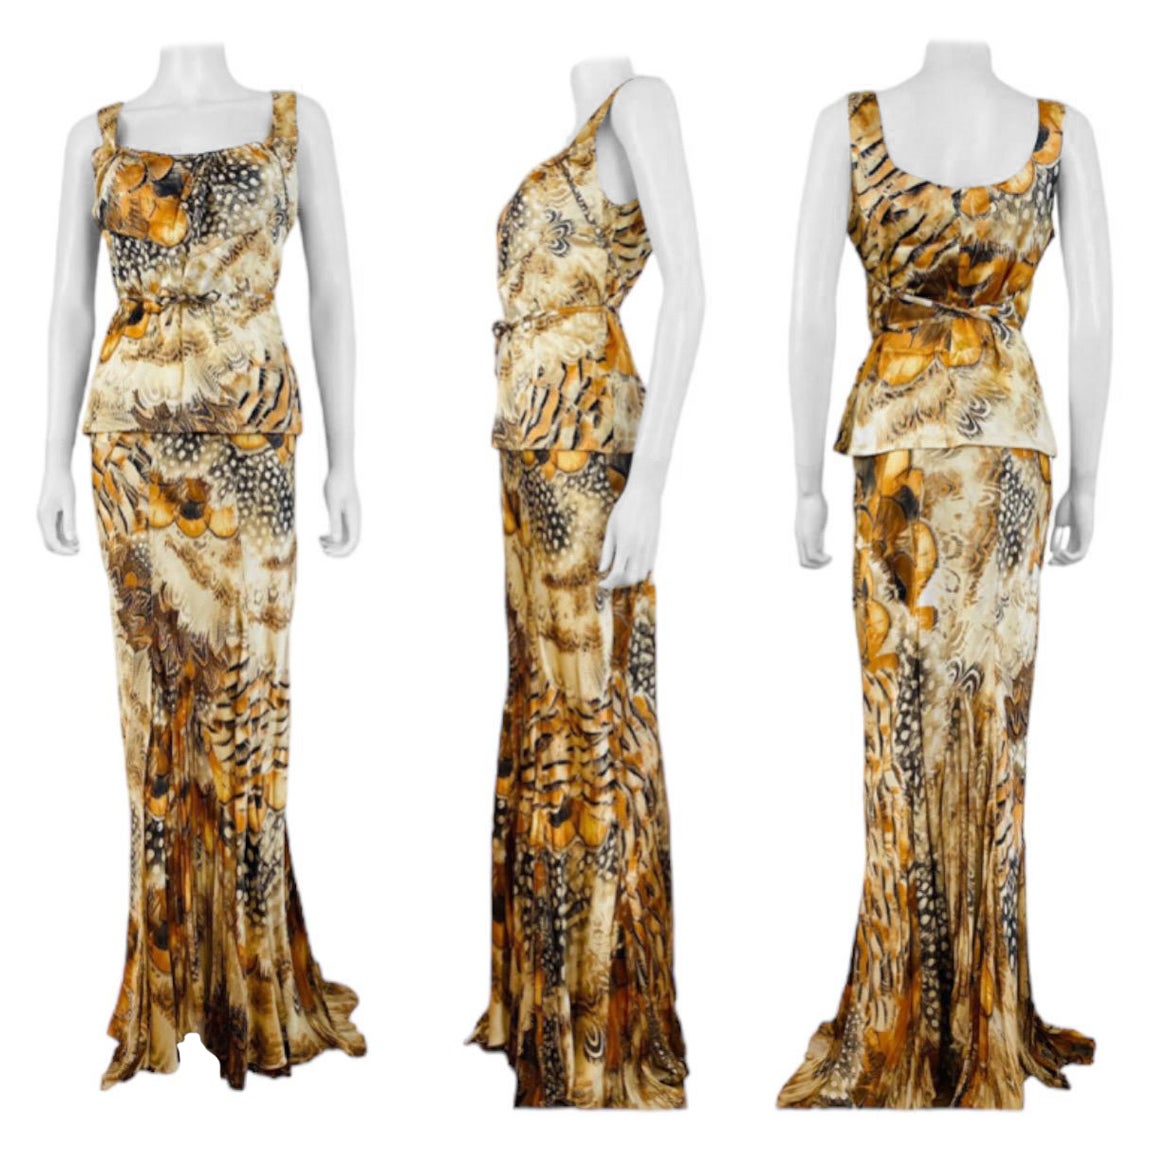 Vintage S/S 2004 Roberto Cavalli Set
Beautiful abstract feather print stretch silk fabric with metallic gold painted accents
Tank style sleeveless top 
Drawstring detail across the top with long ties can be tied multiple ways
Matching maxi length